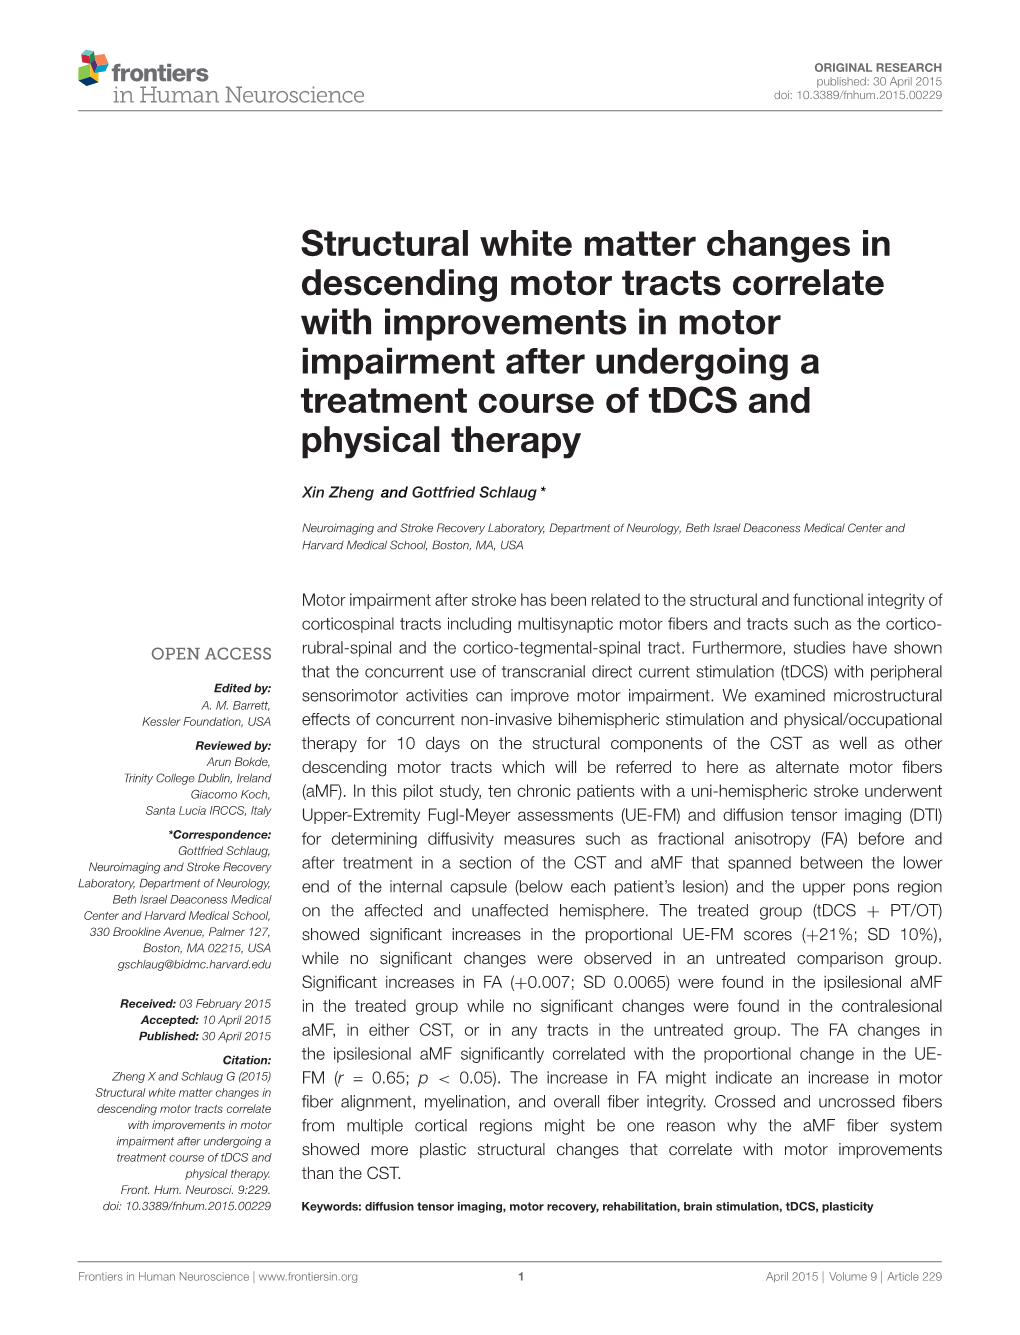 Structural White Matter Changes in Descending Motor Tracts Correlate